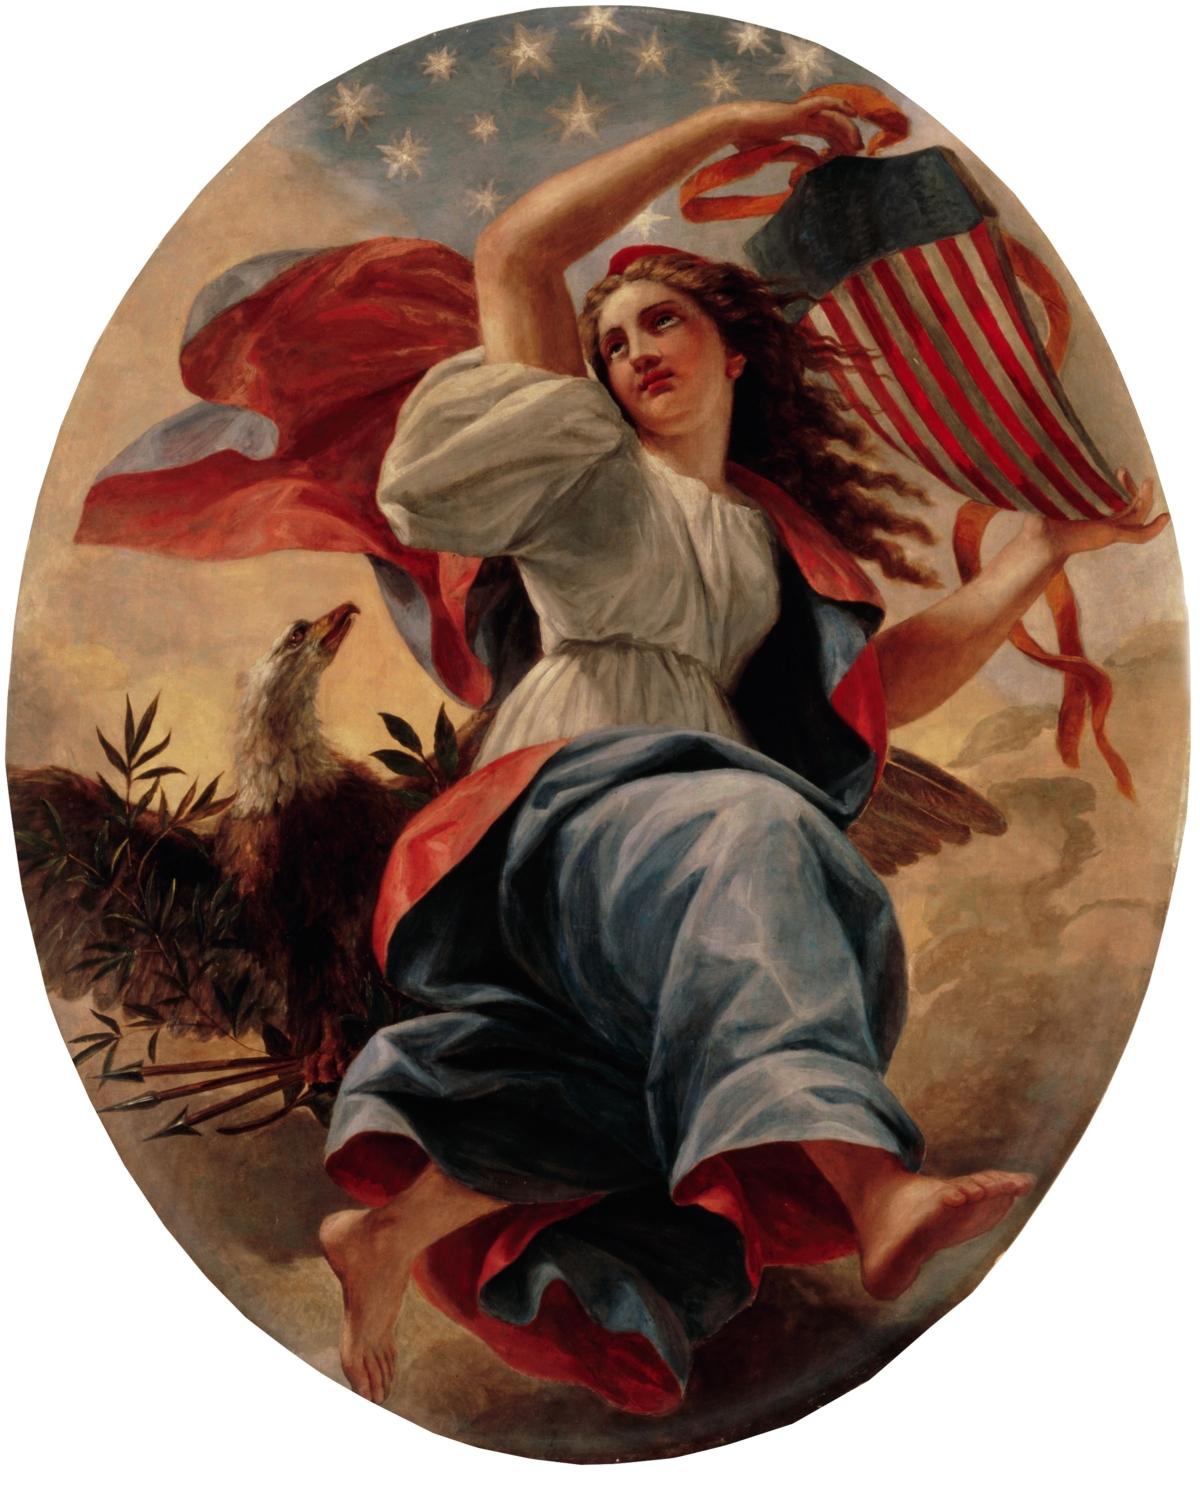  “Union” by Constantino Brumidi. It is mounted on the ceiling of the White House entrance hall. White House Historical Association. (Public Domain)